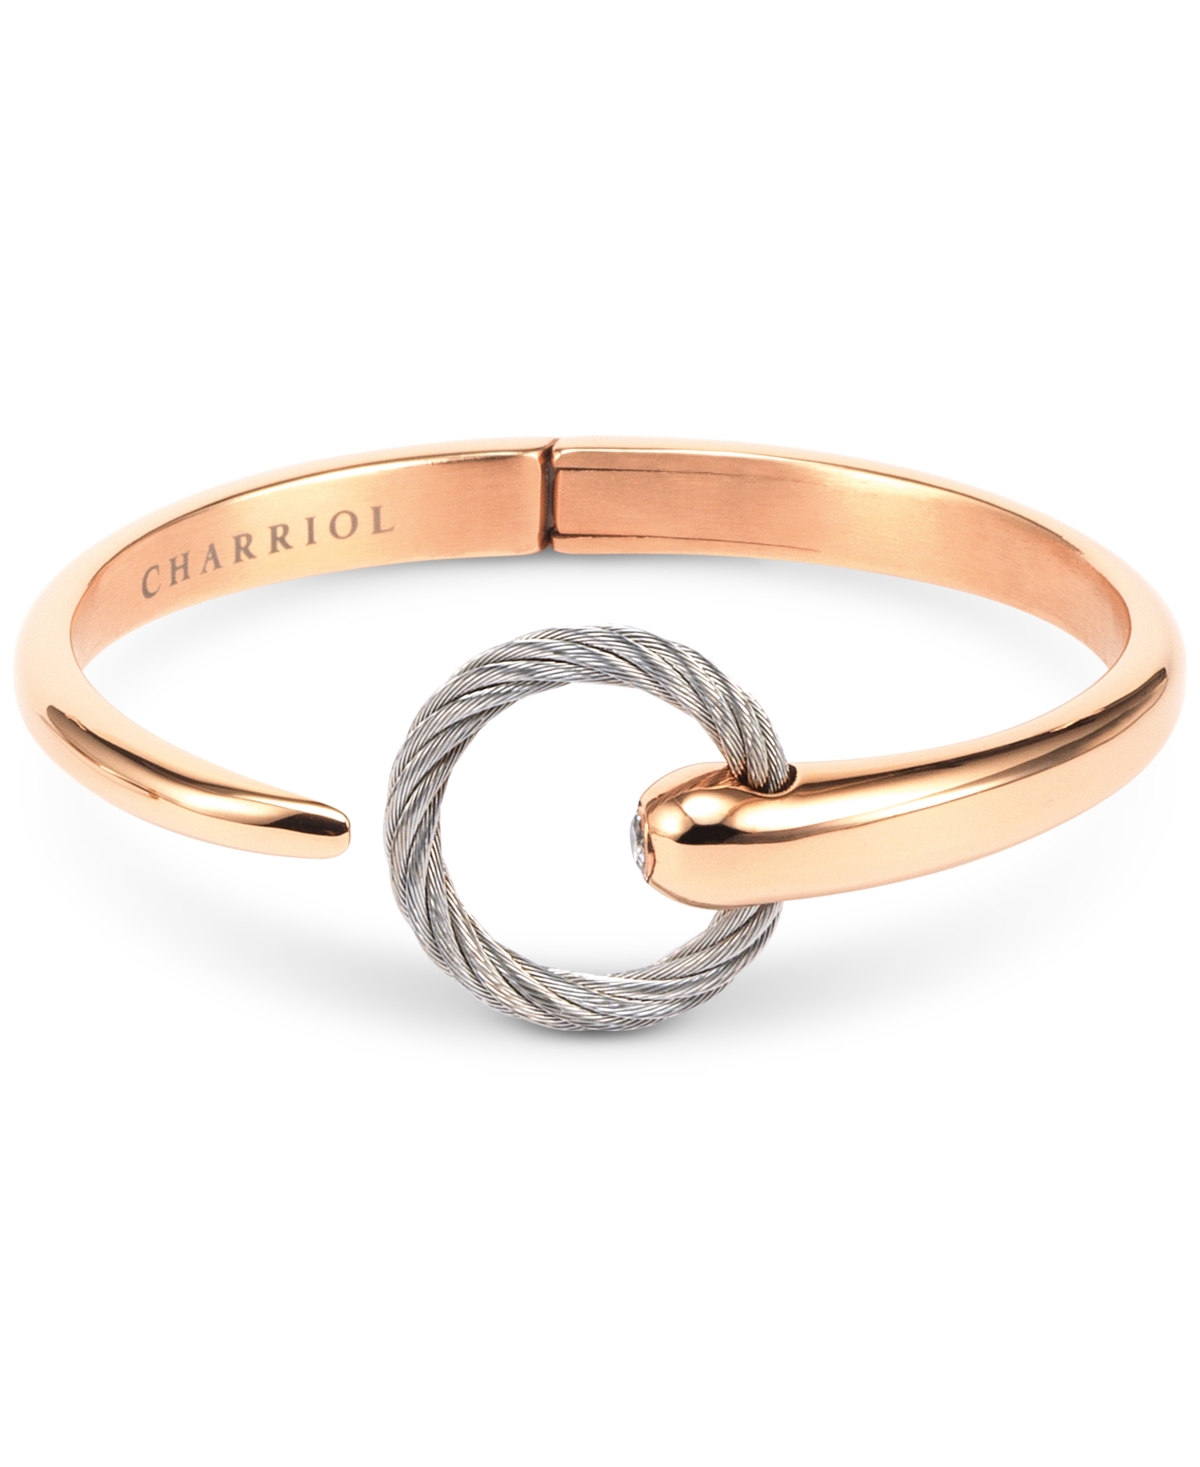 Charriol White Topaz Two-Tone Bangle Bracelet (1/5 ct. t.w.) in Stainless Steel & 14k Rose Gold-Plated Stainless Steel Pvd